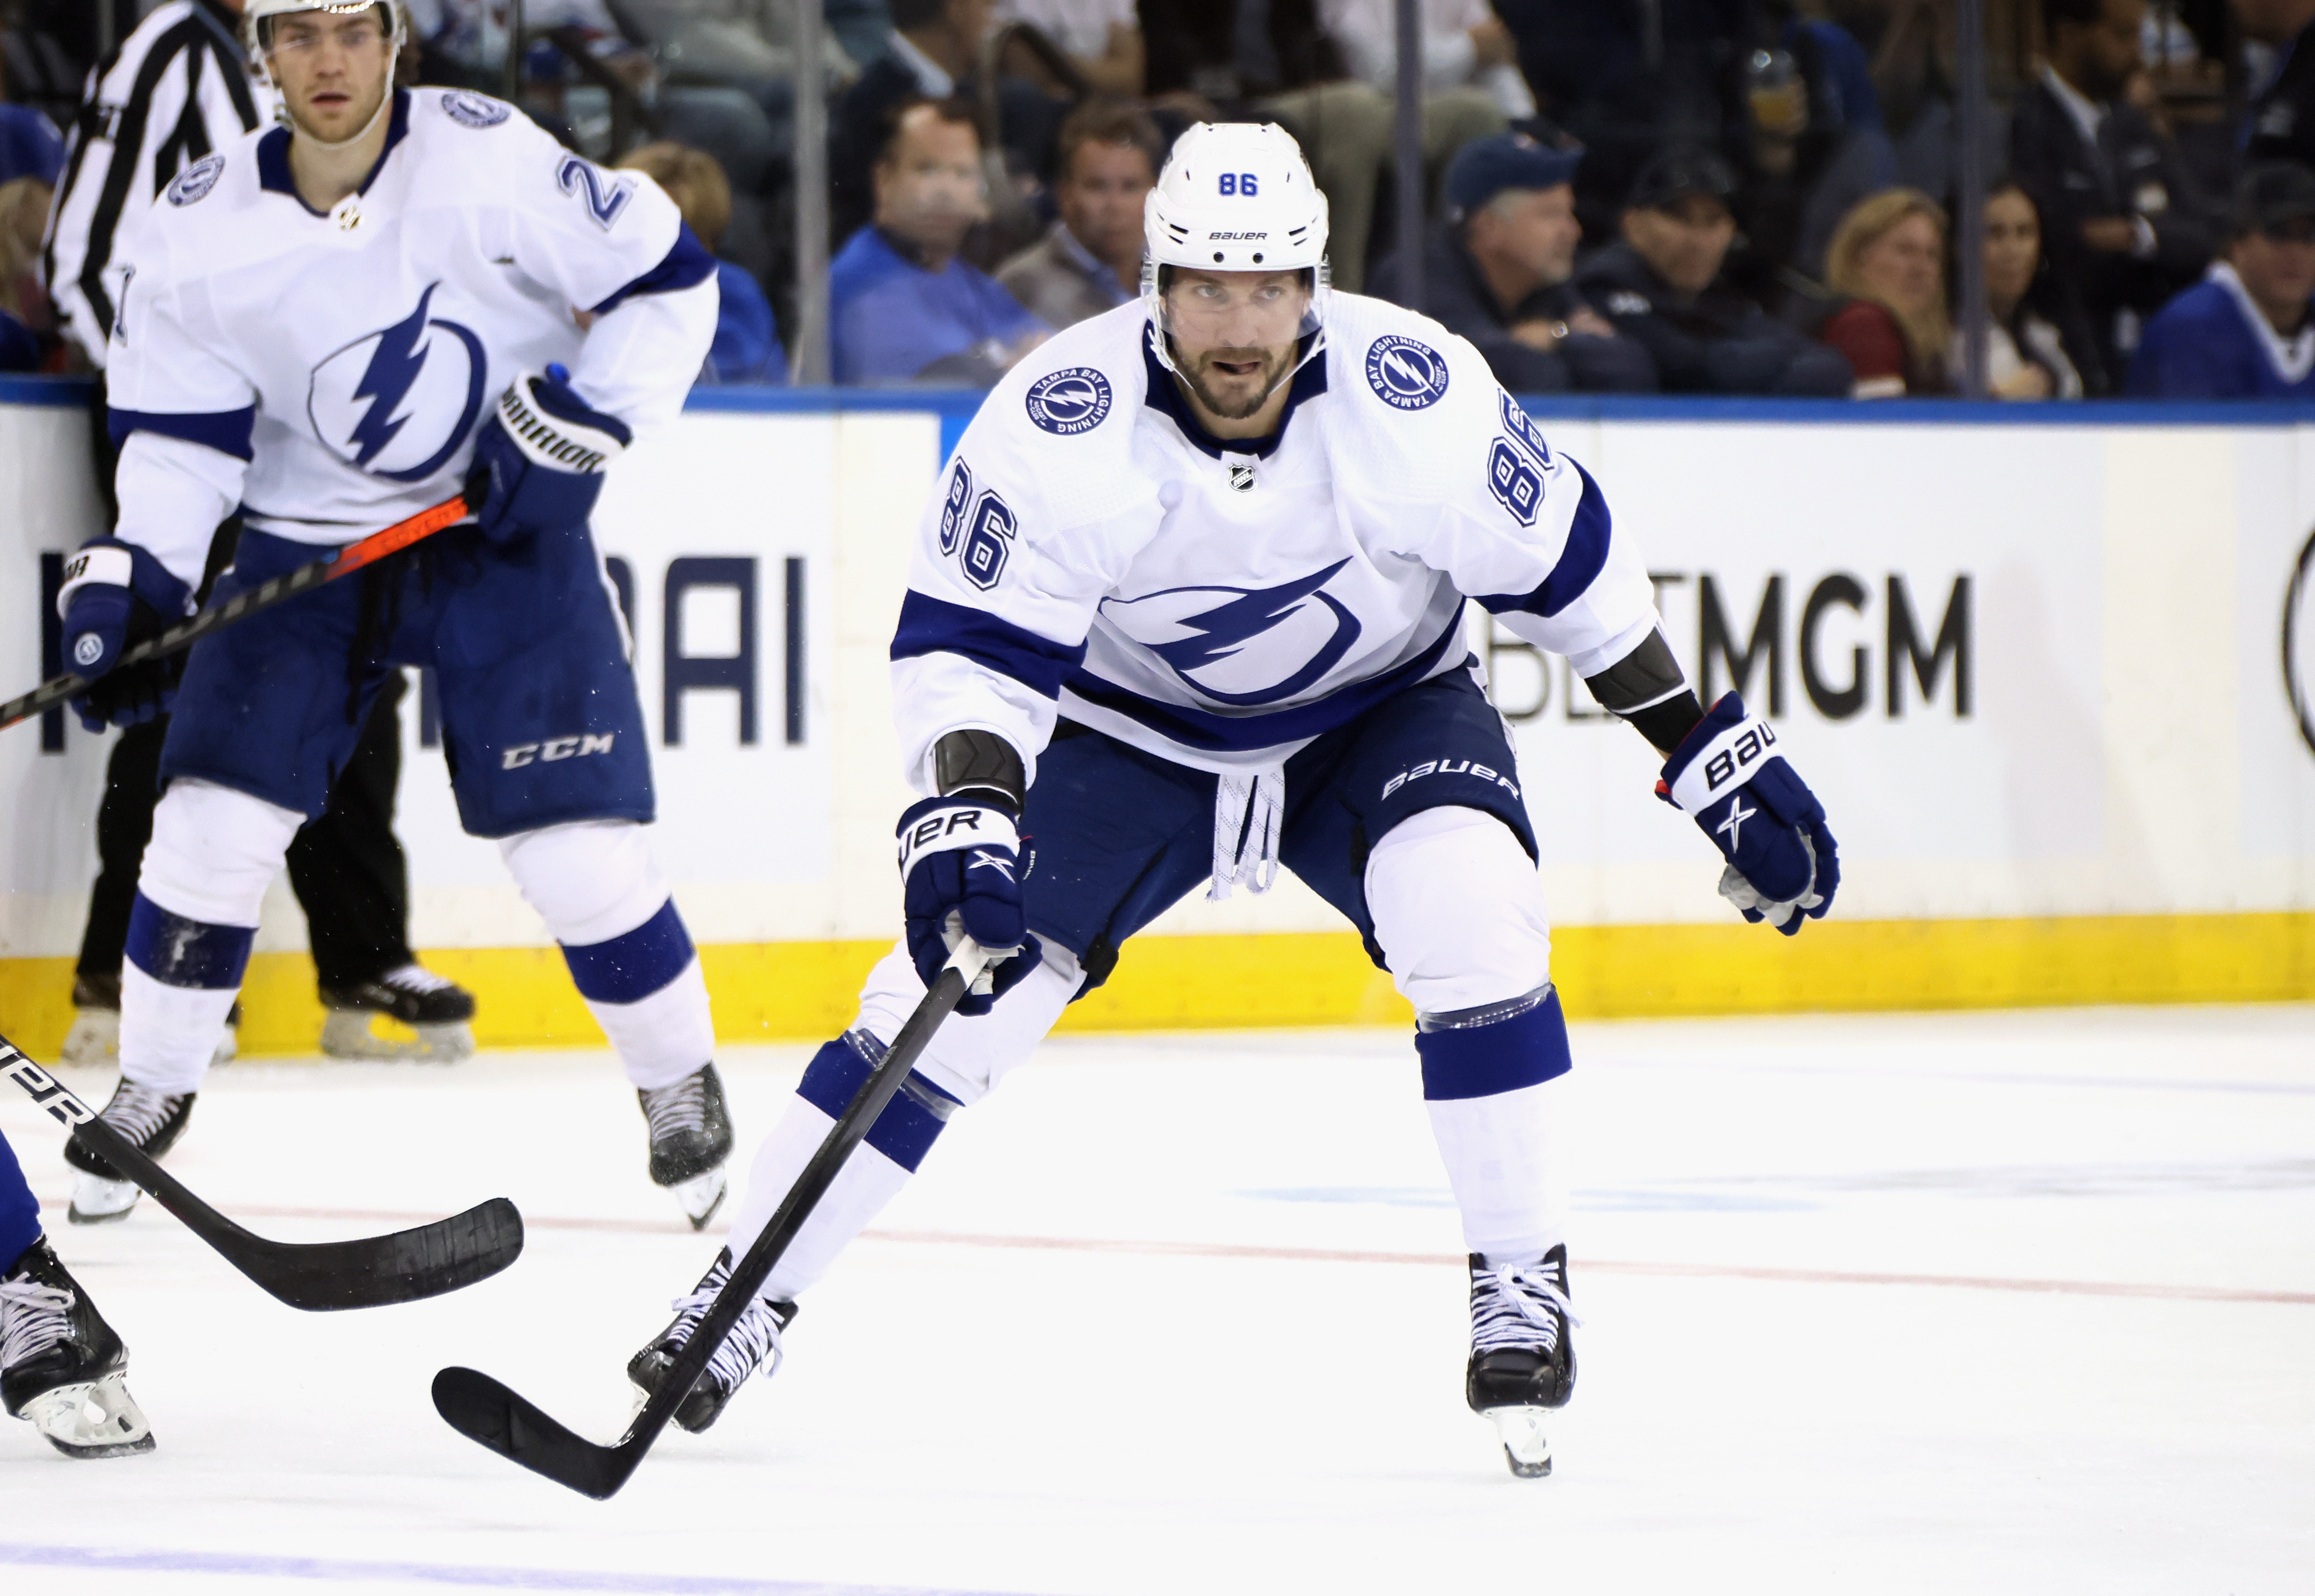 Nikita Kucherov of the Tampa Bay Lightning skates against the New York Rangers at Madison Square Garden during the season opening game on October 11, 2022 in New York City. The Rangers defeated the Lightning 3-1.